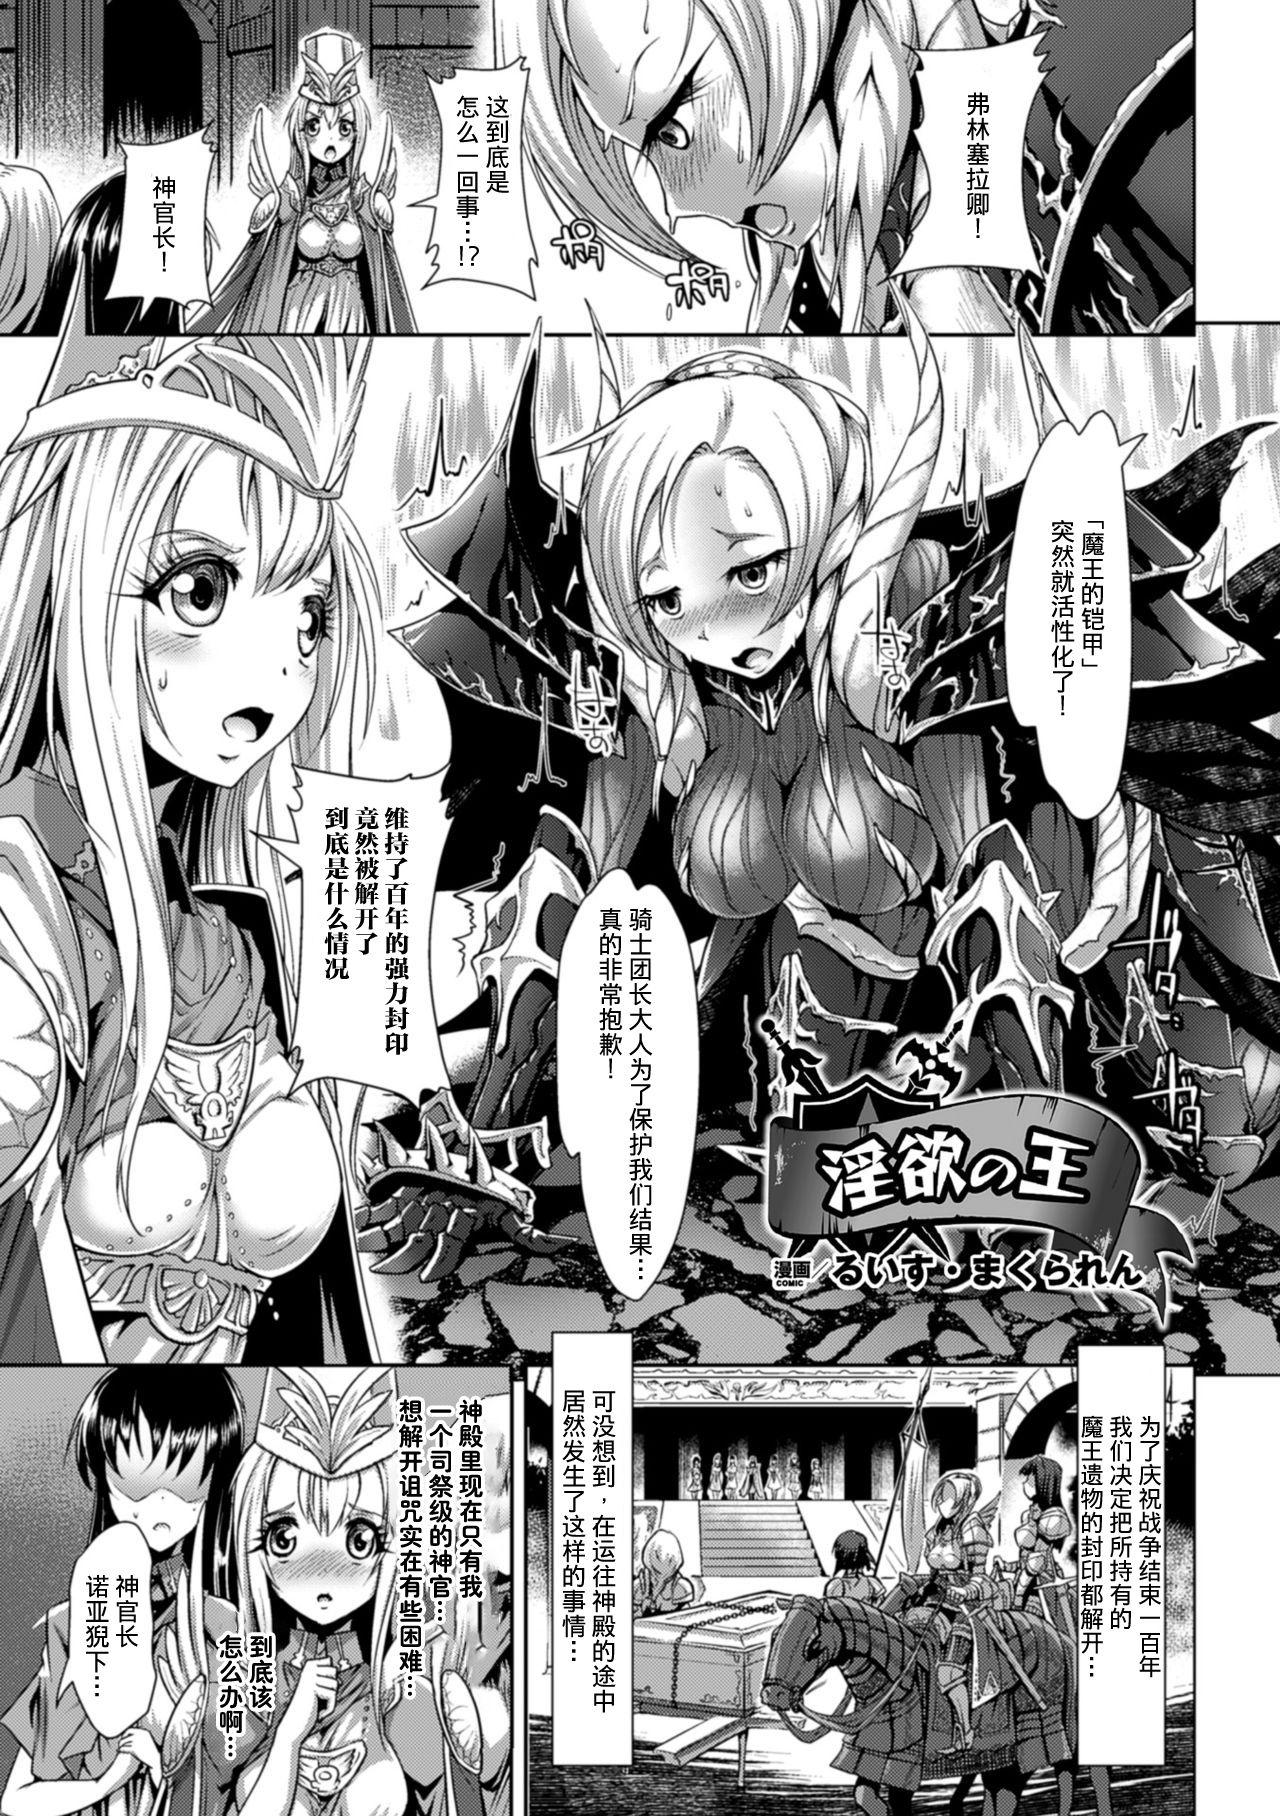 Oil Inyoku no Ou | The Ruler of Lust Chubby - Page 1